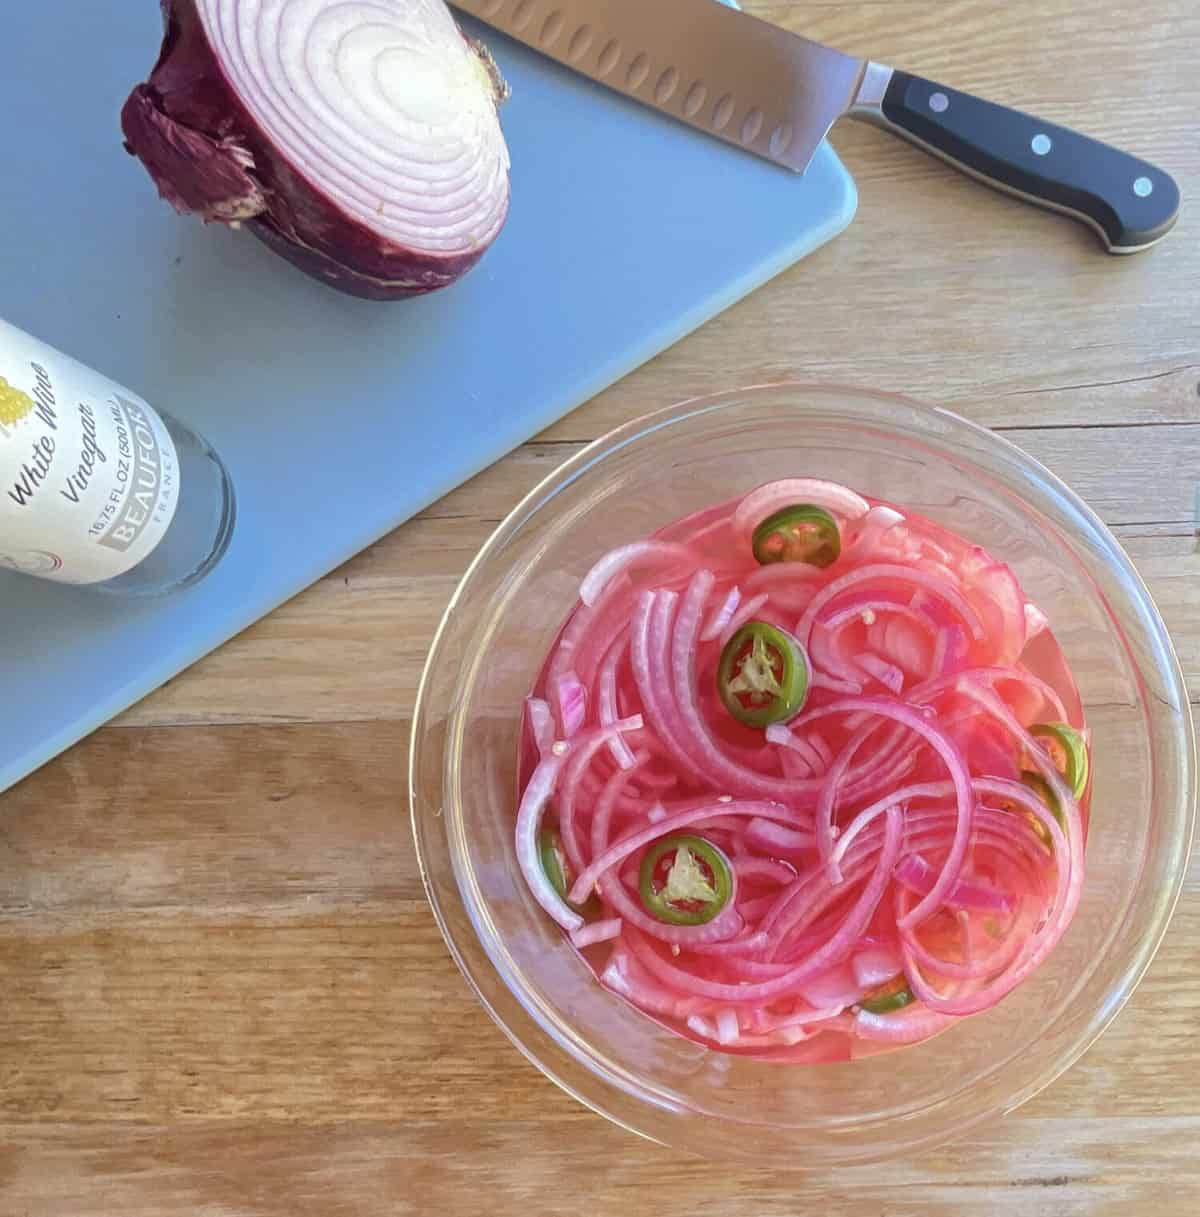 bowl of pickled onions and chili pepper with a cutting board, red onion, and knife.